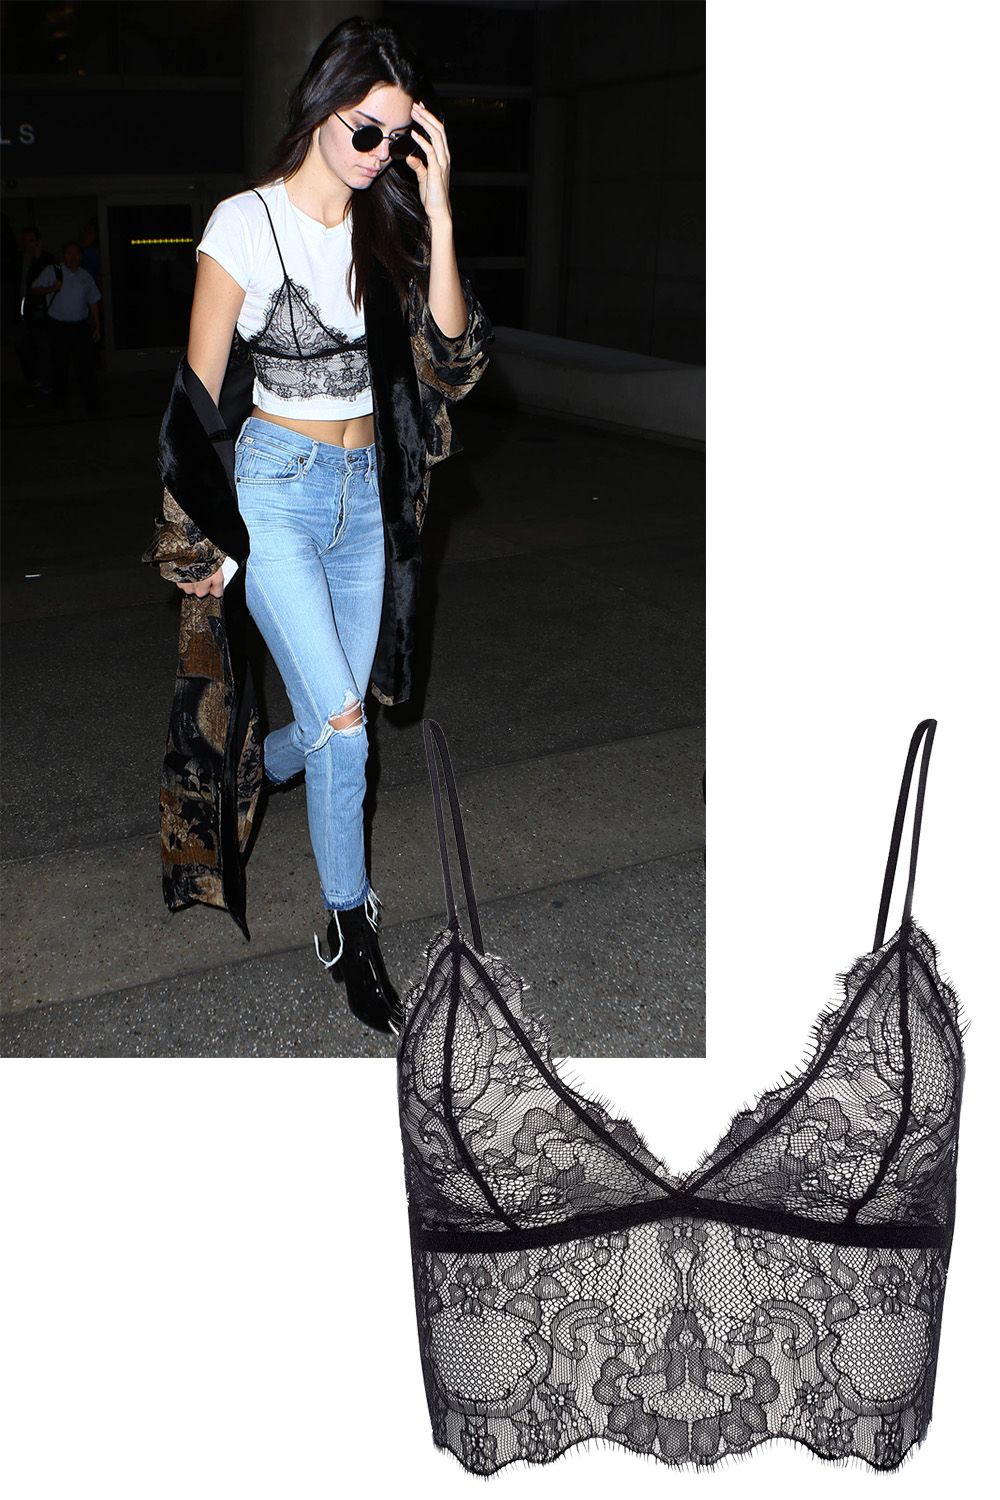 How To Wear Bralettes: Outfit Ideas